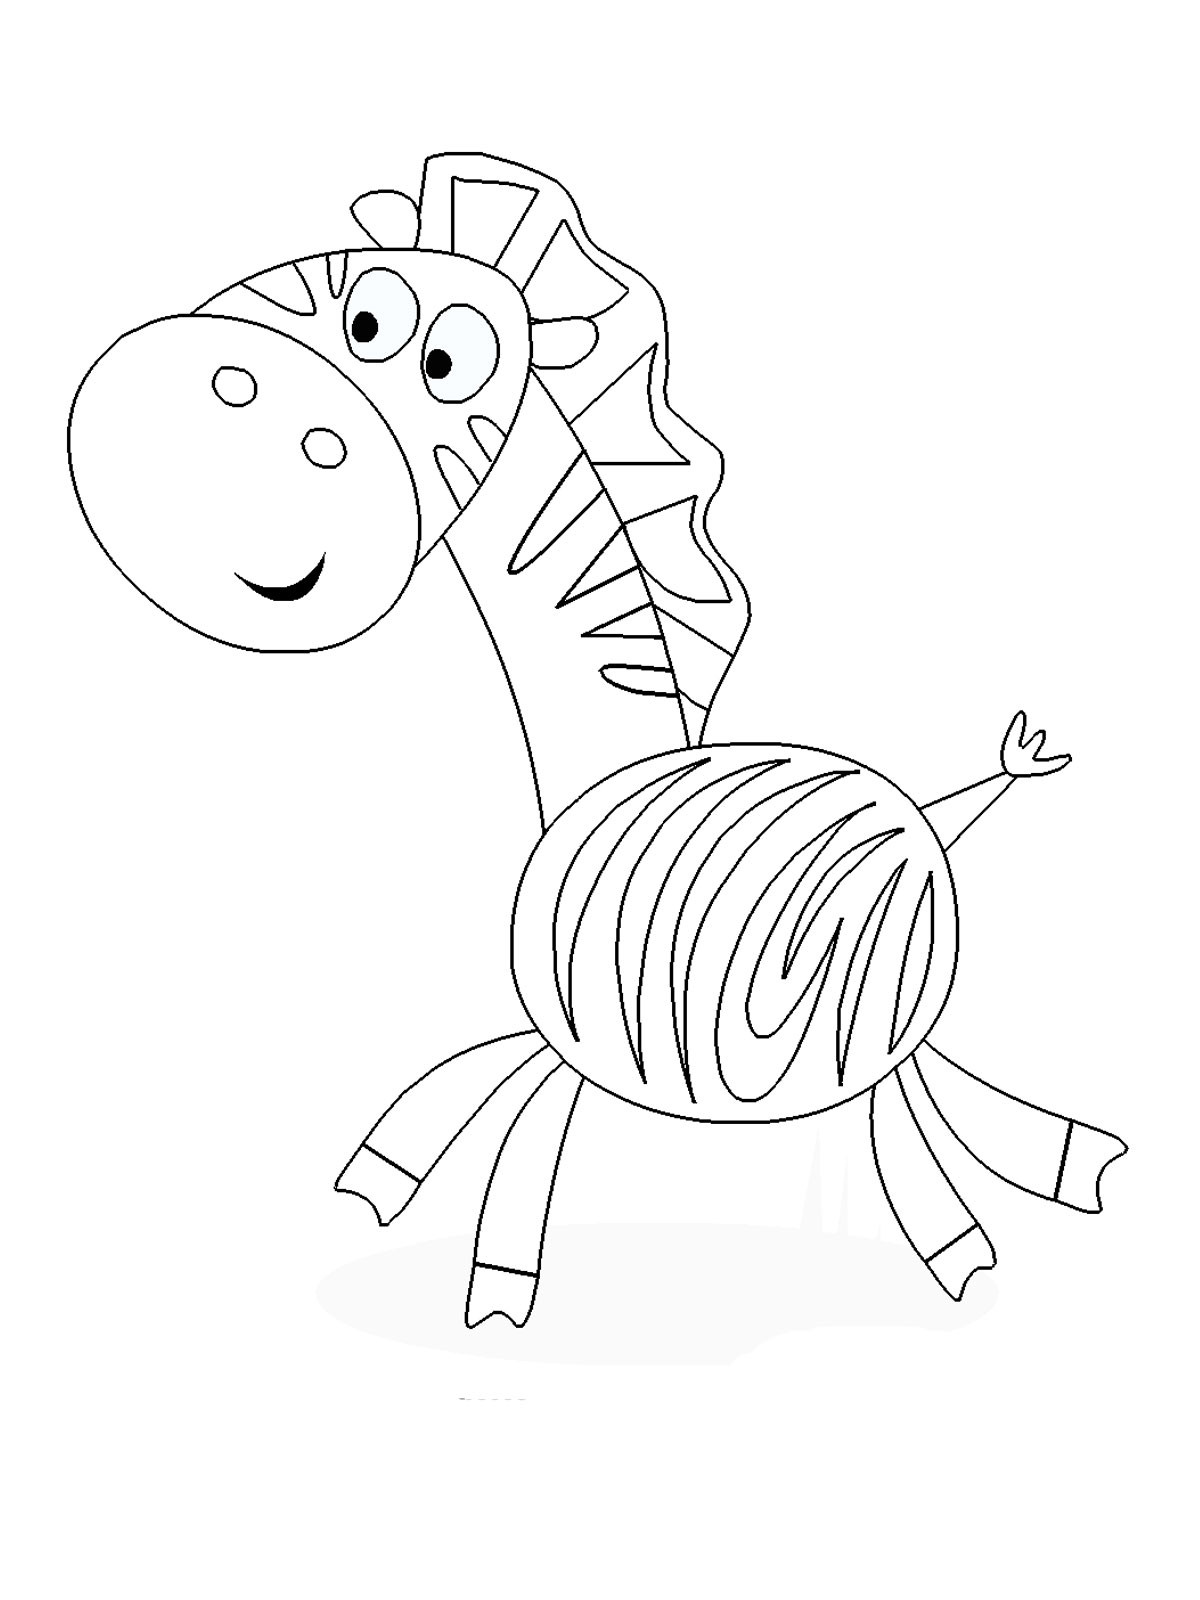 Kids Online Coloring
 Printable coloring pages for kids